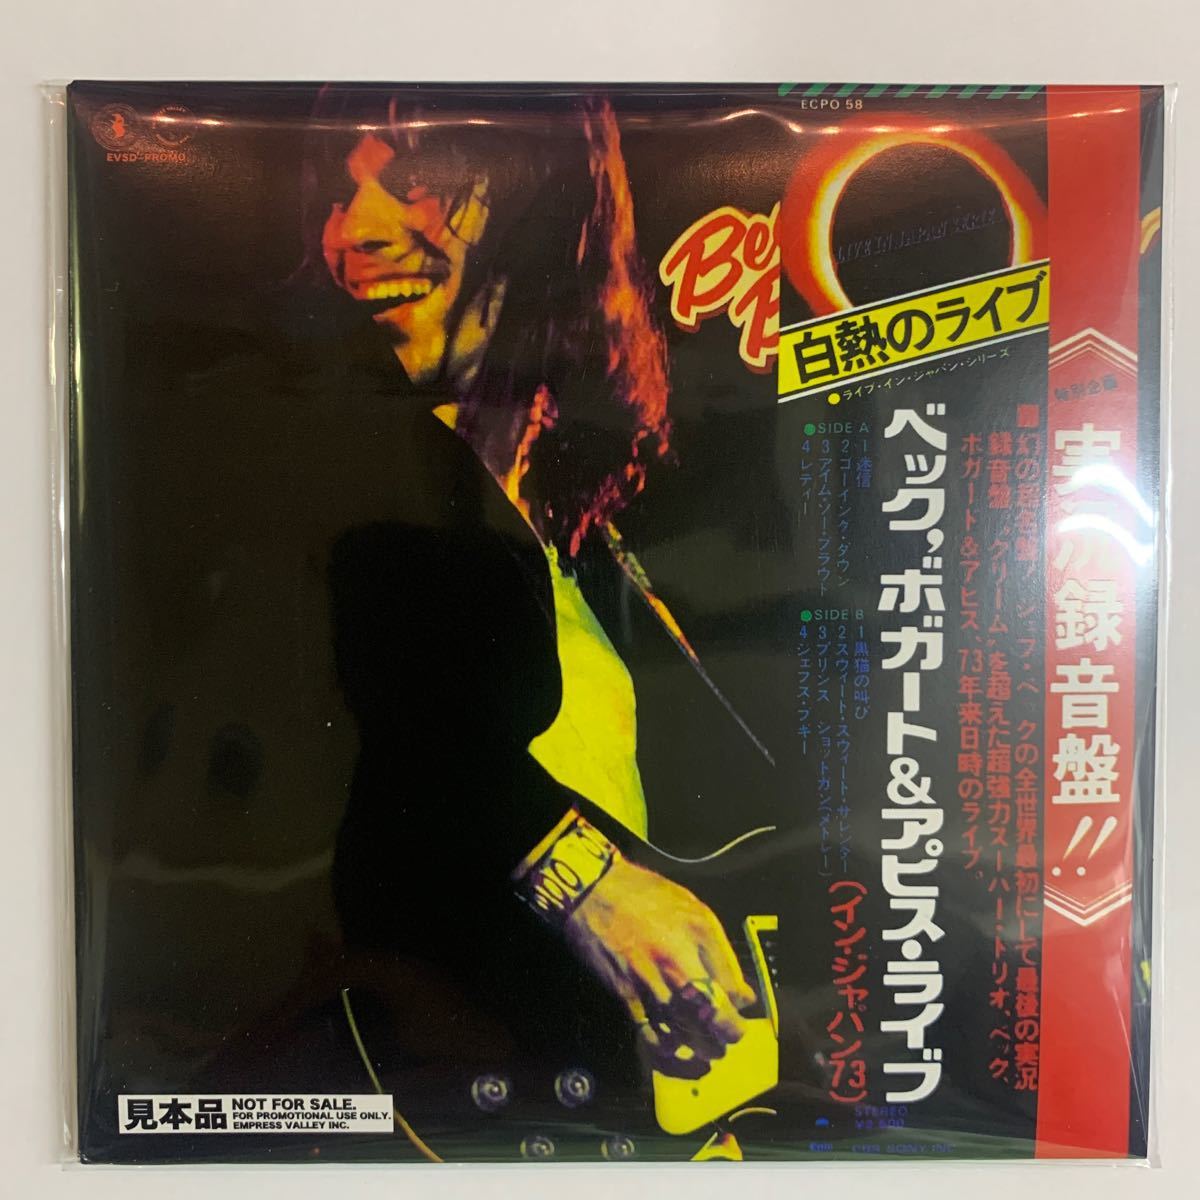 BECK, BOGERT & APPICE BBA / JEFF BECK GROUP / LIVE IN TOKYO 2CD 100セット限定盤！ボックスセットリリースに伴う販売促進用アイテム！_画像1